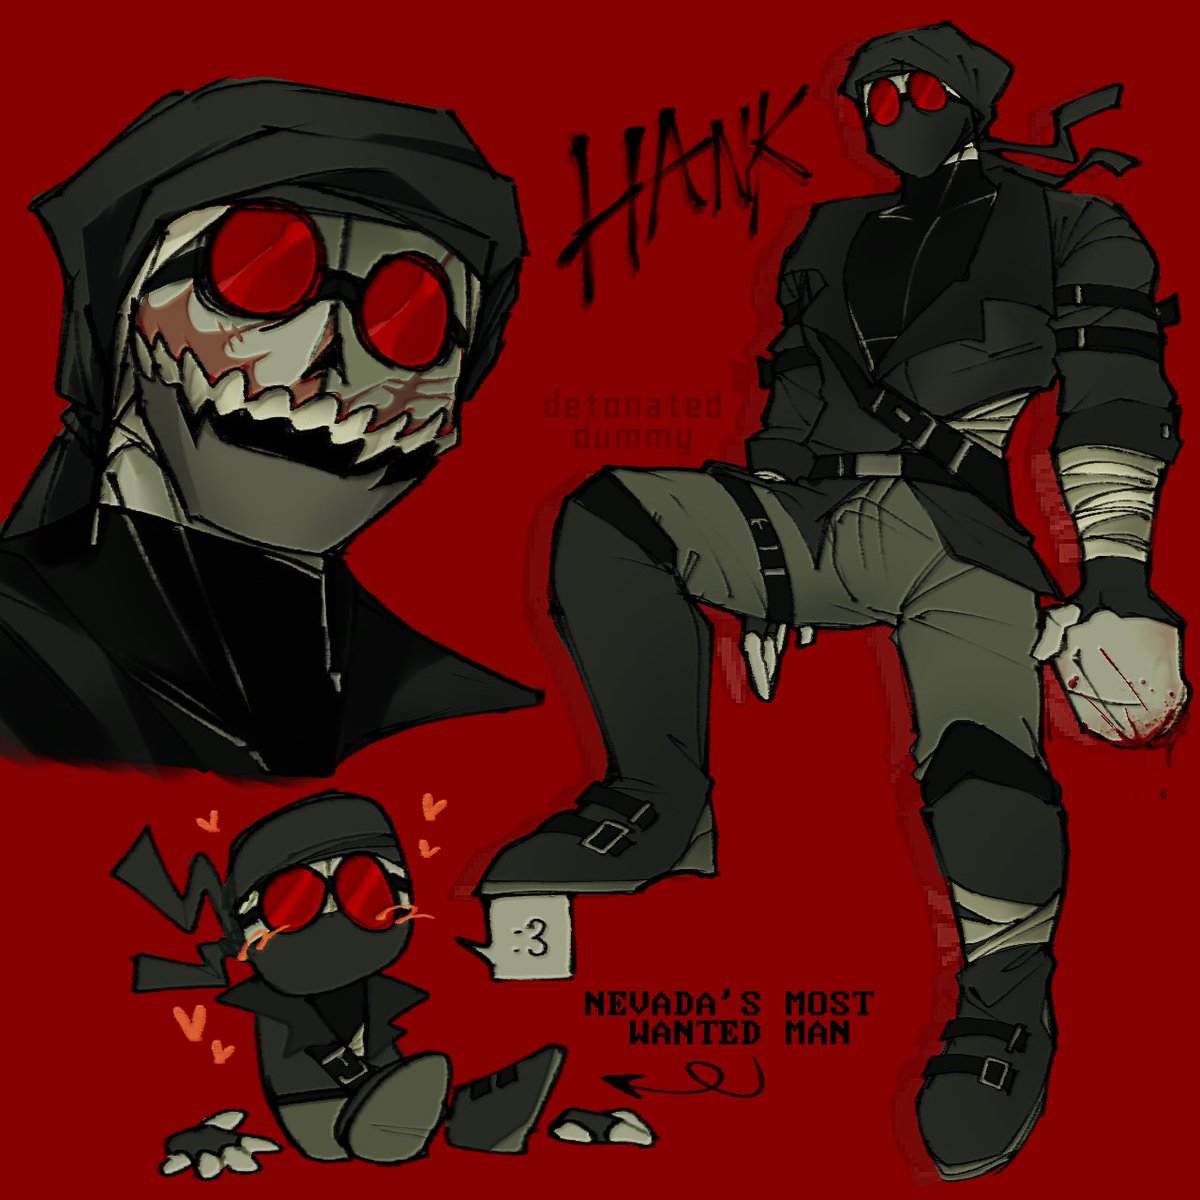 its been so long since ive drawn this guy properly
#madnesscombat #hankjwimbleton